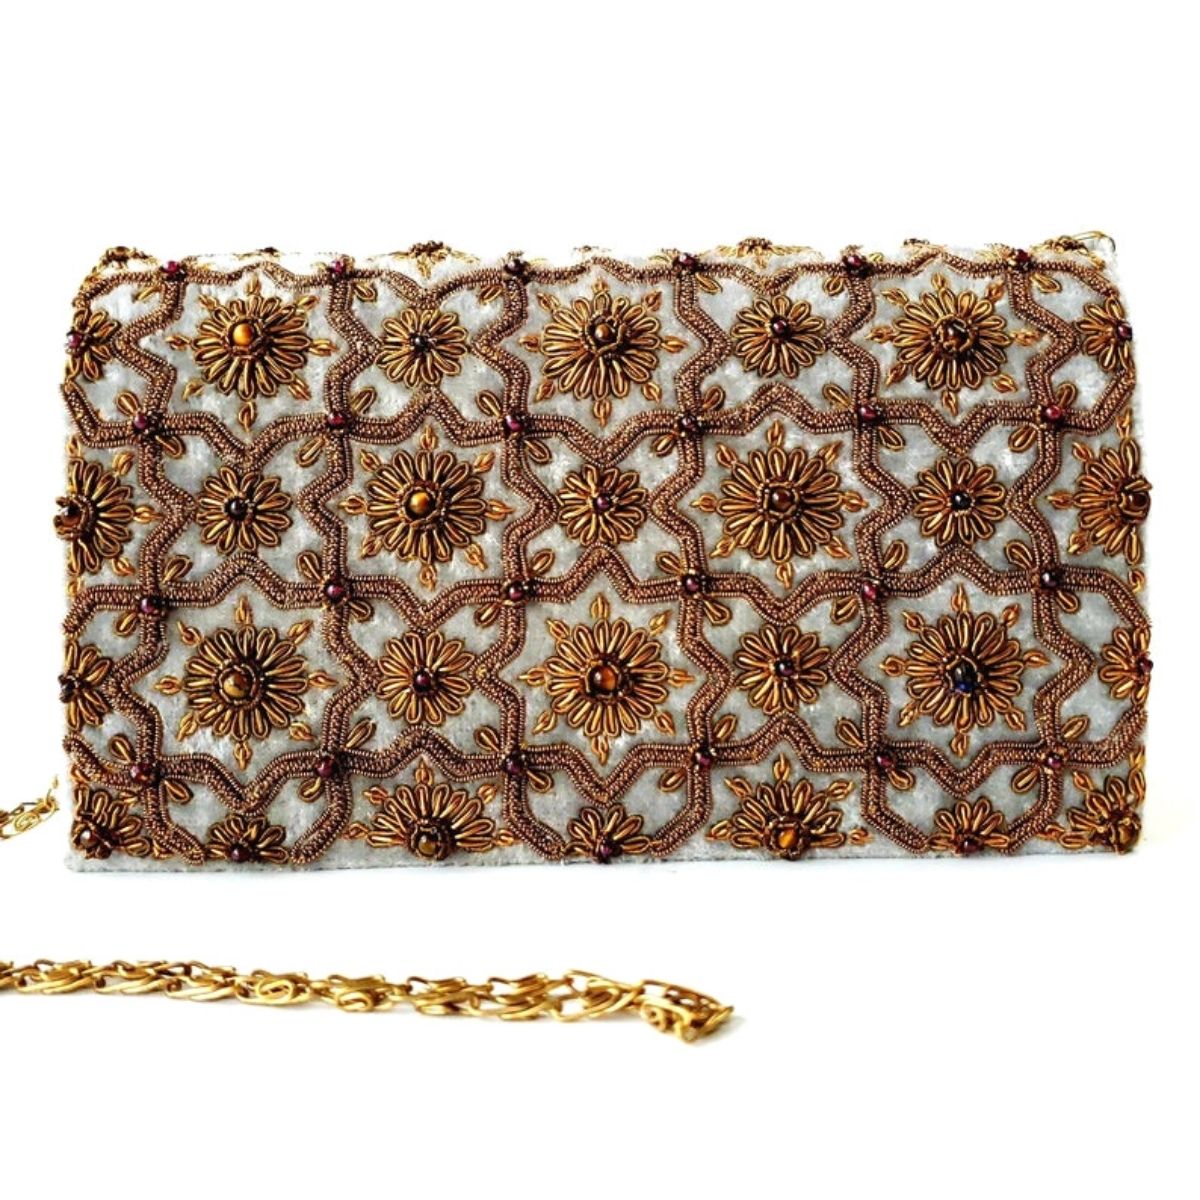 Exclusive designer gray velvet clutch bag embroidered with copper flowers and embellished with tiger eye and garnet gemstones. 